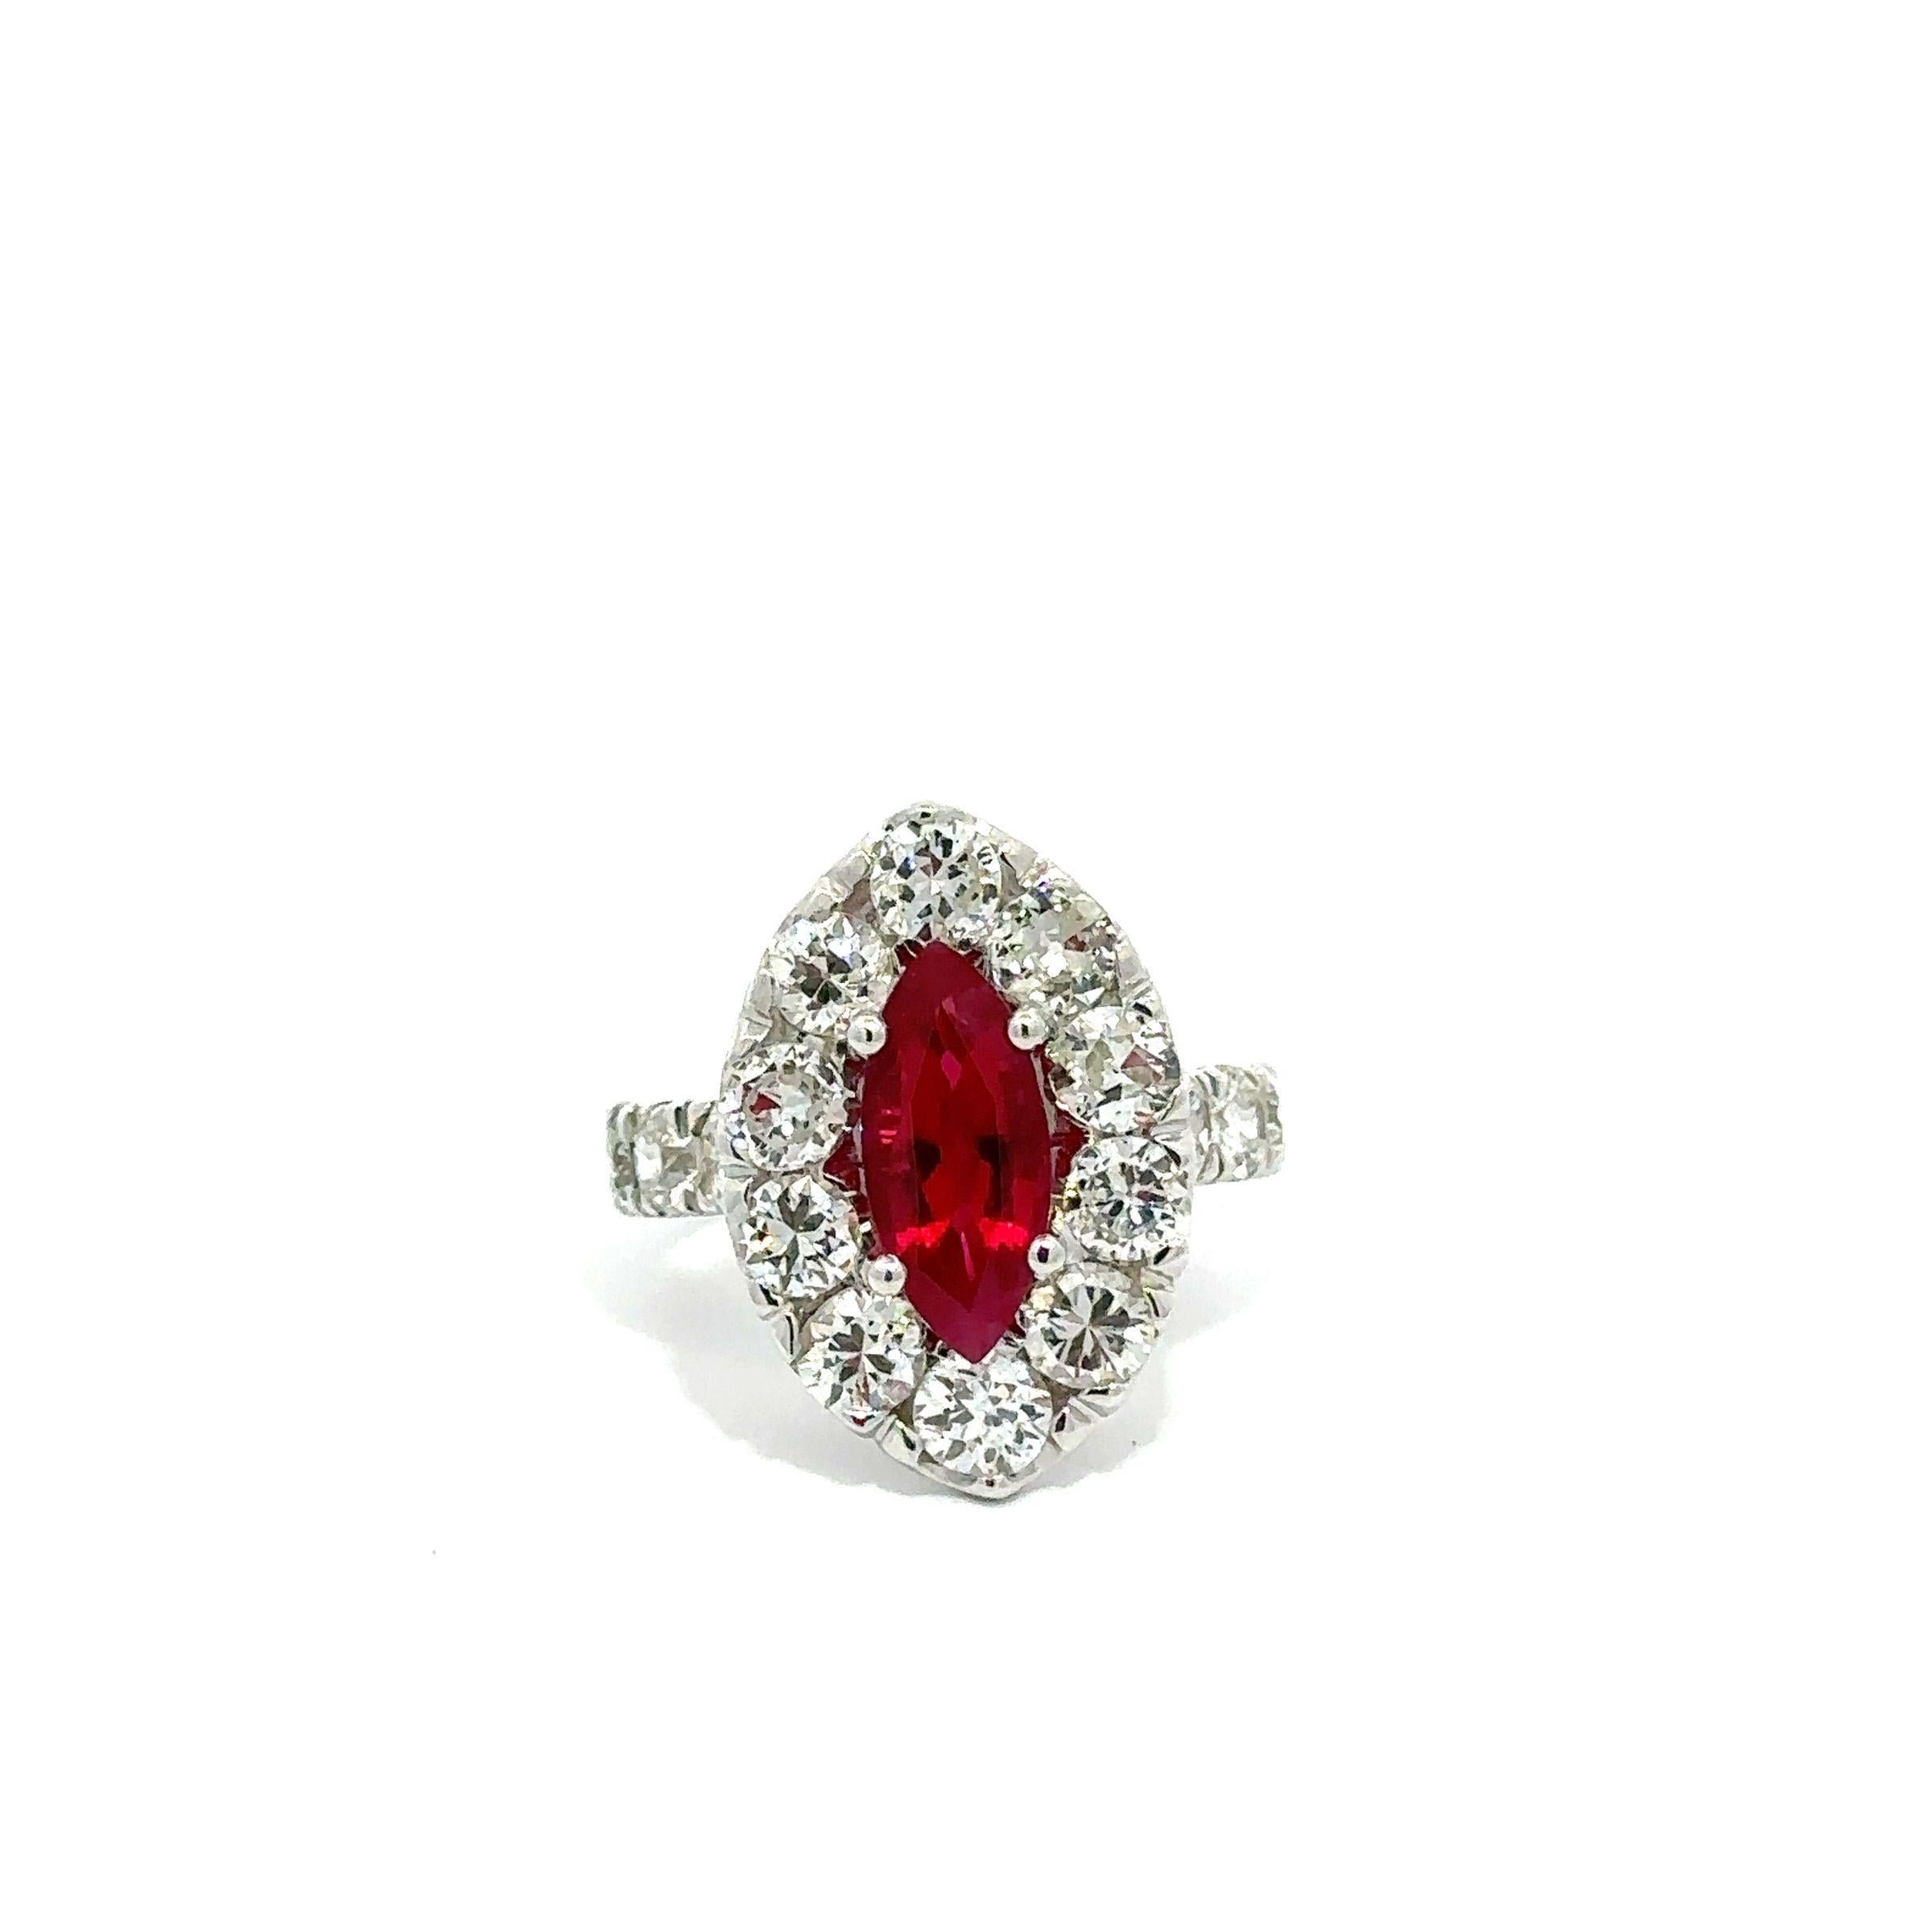 This large and dramatic cocktail ring features a Burma originated marquise cut ruby that has a fine and truly exceptional vivid red color. It is certified by both GIA and AGL as having only minor heating treatment and weighing 2.42 carats. The ring